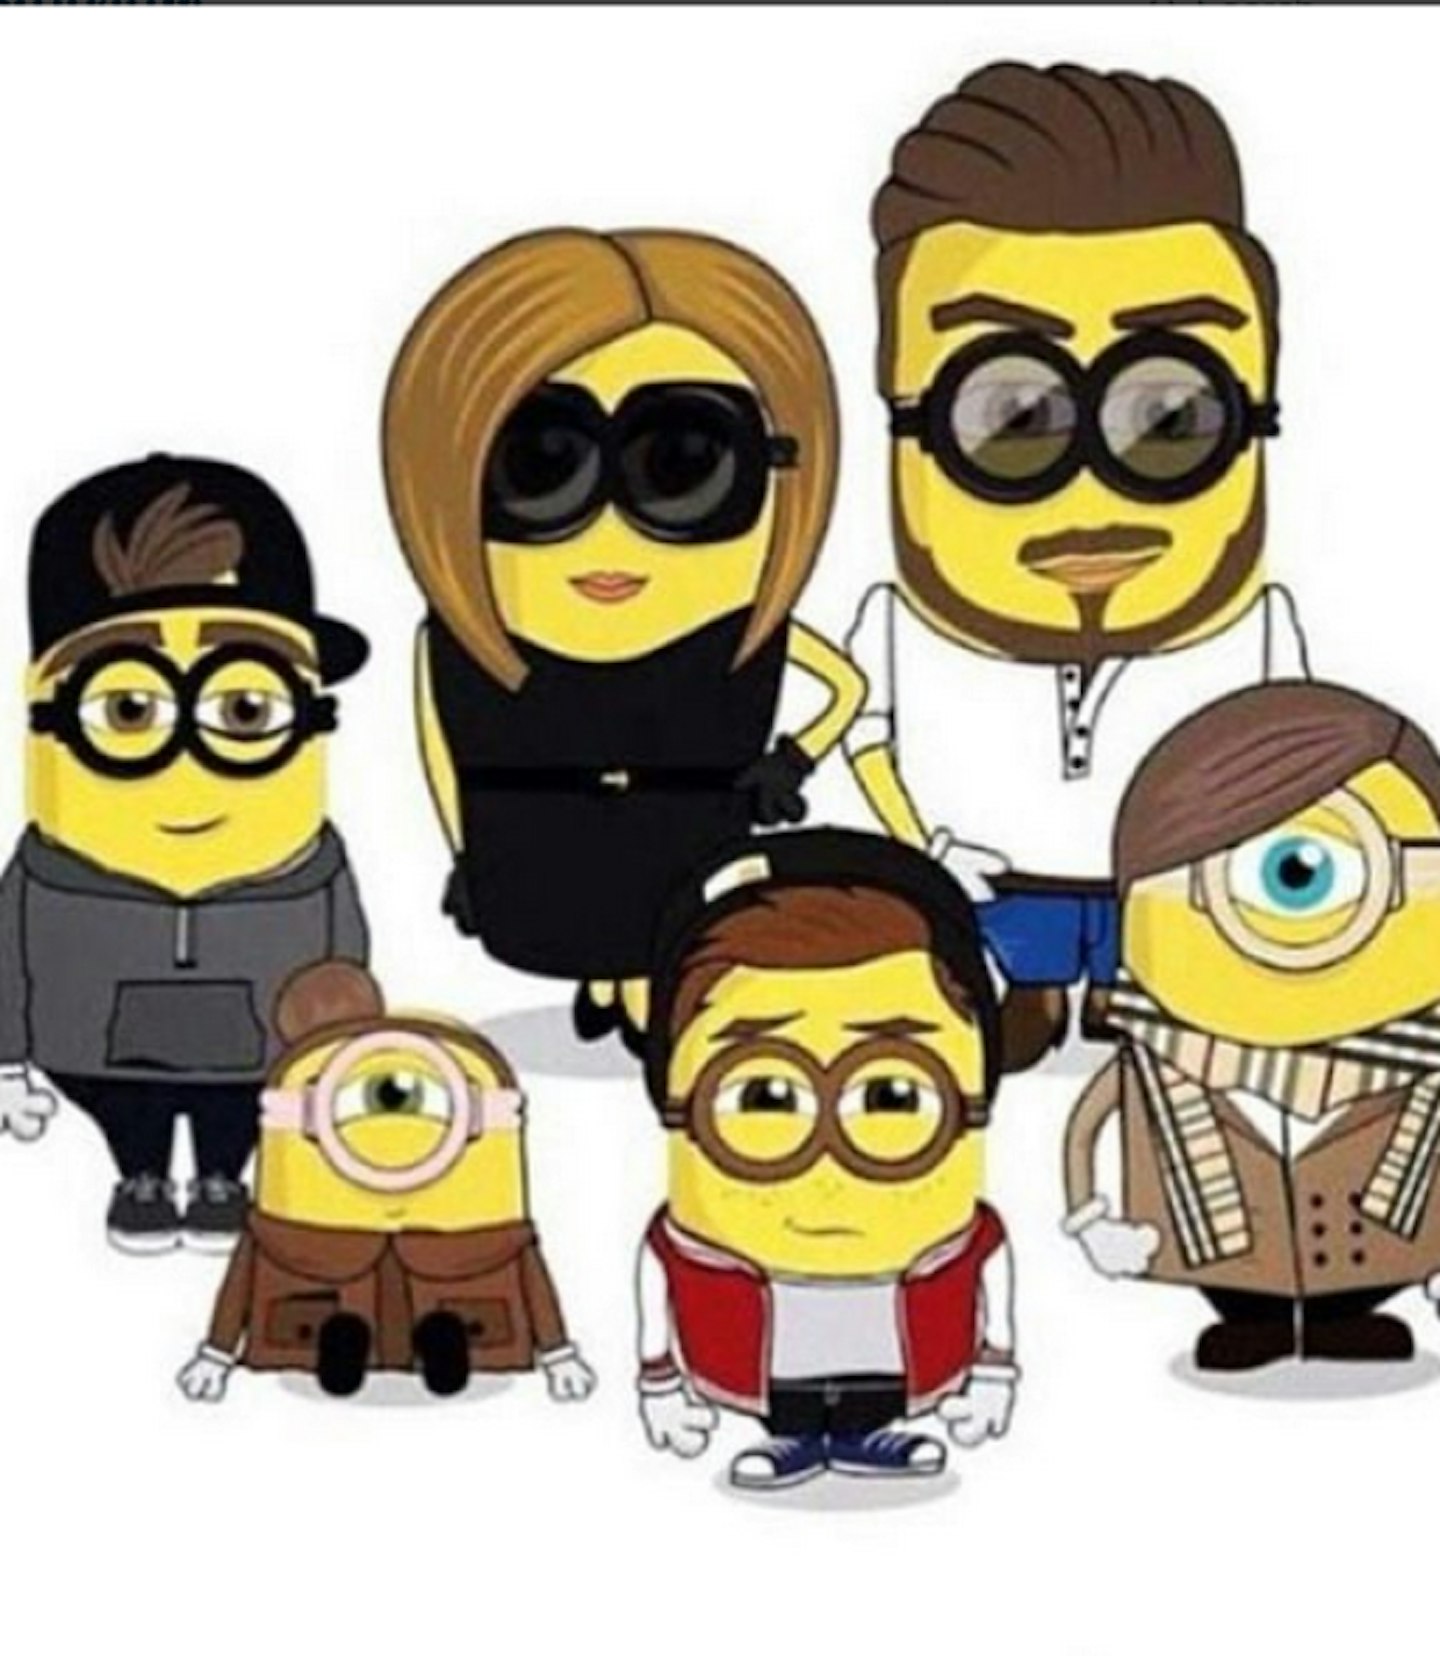 The ultimate Minions